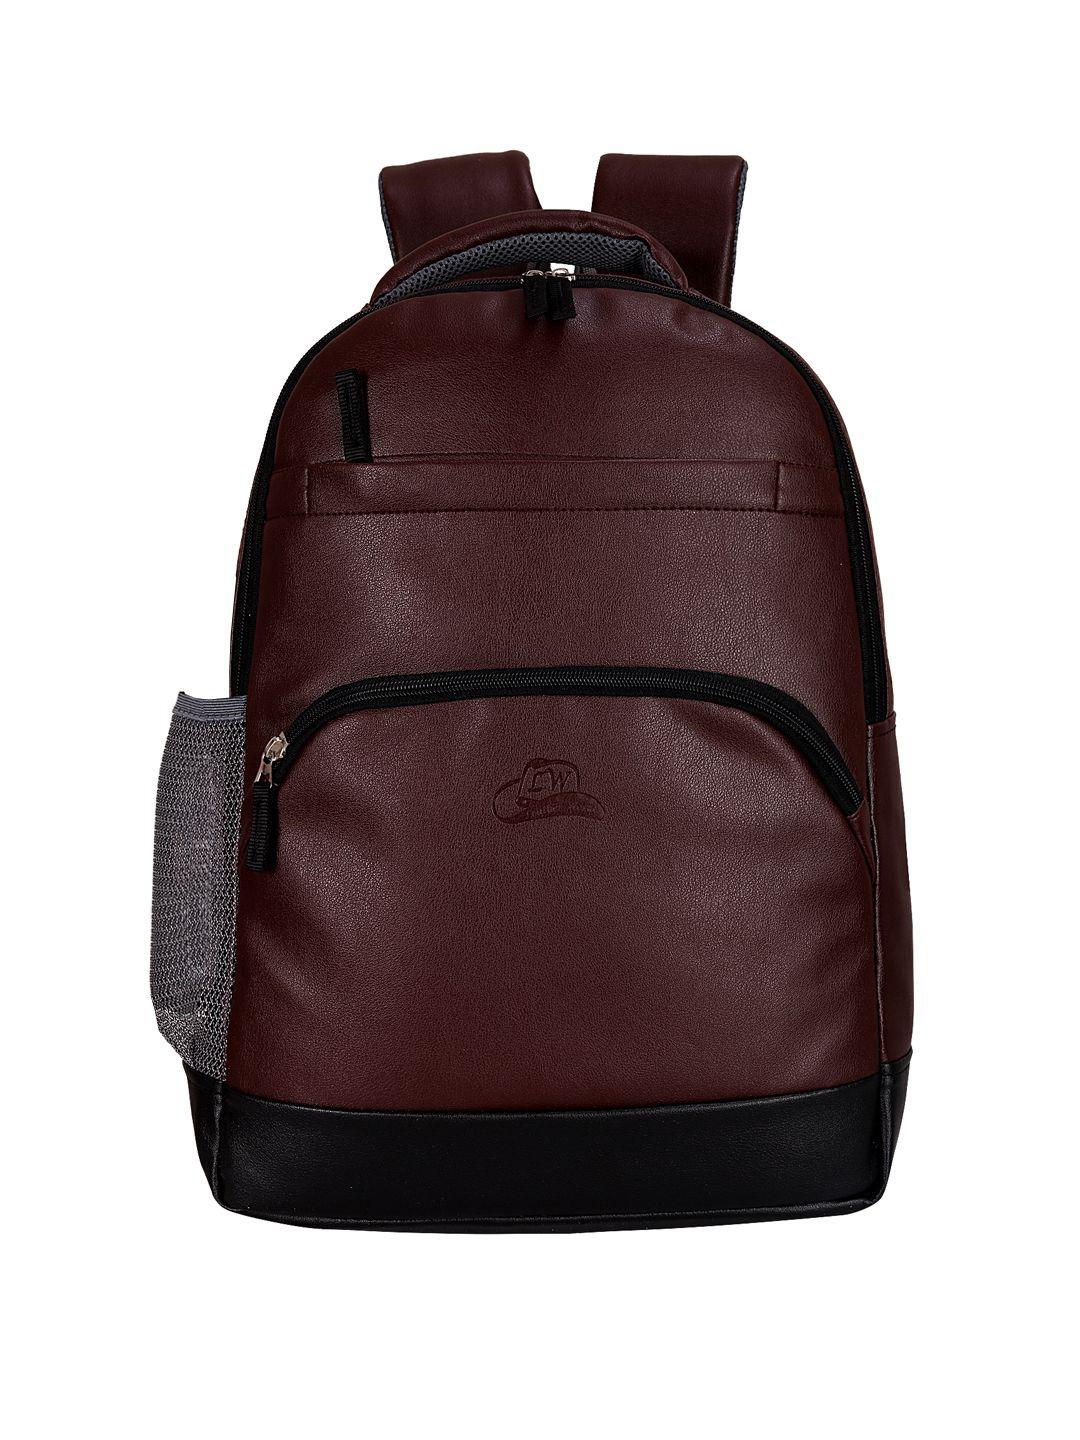 leather world unisex brown solid backpack